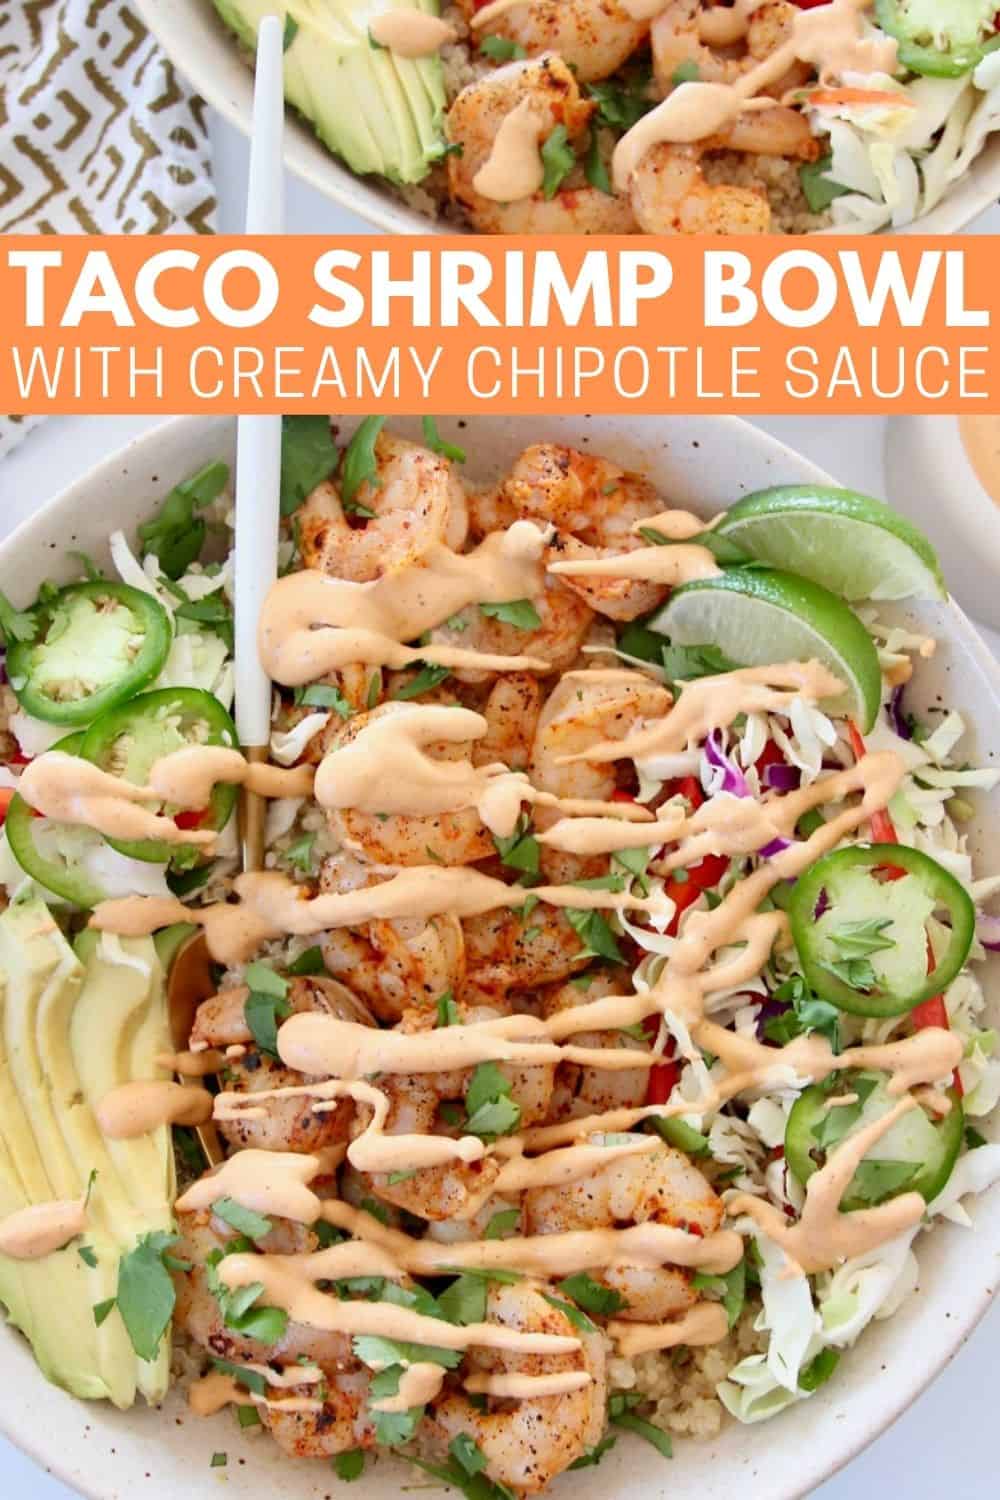 Shrimp Taco Bowl with Chipotle Sauce - Bowls Are The New Plates